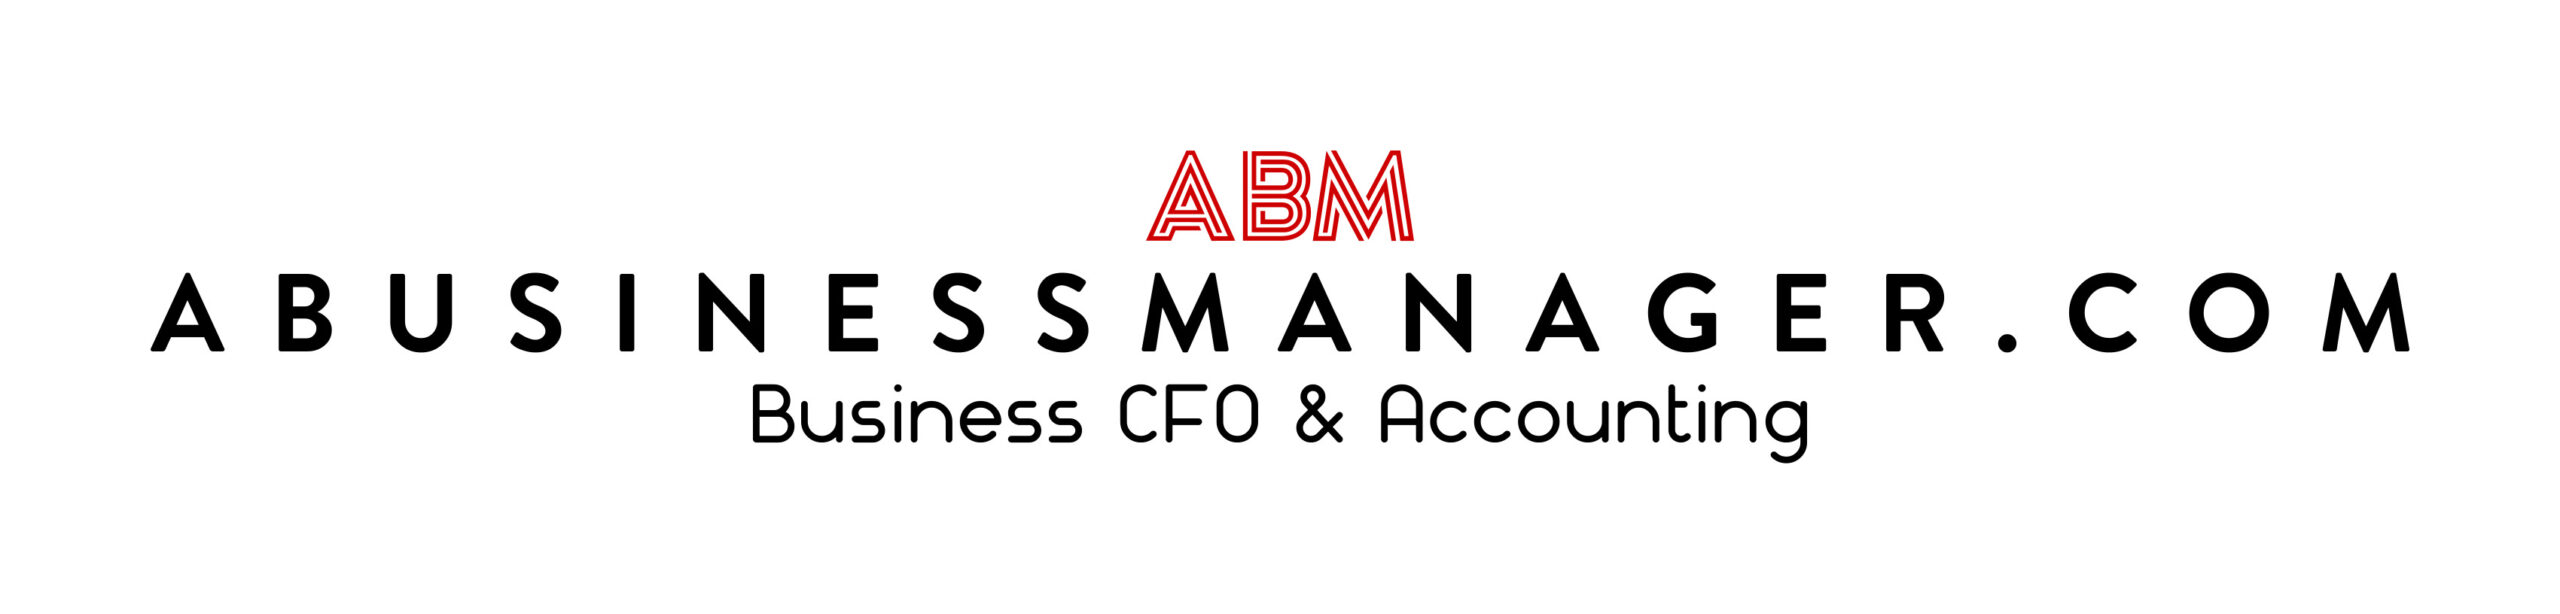 Virtual CFO Services, Accounting and Bookkeeping For Small and Medium Size Companies